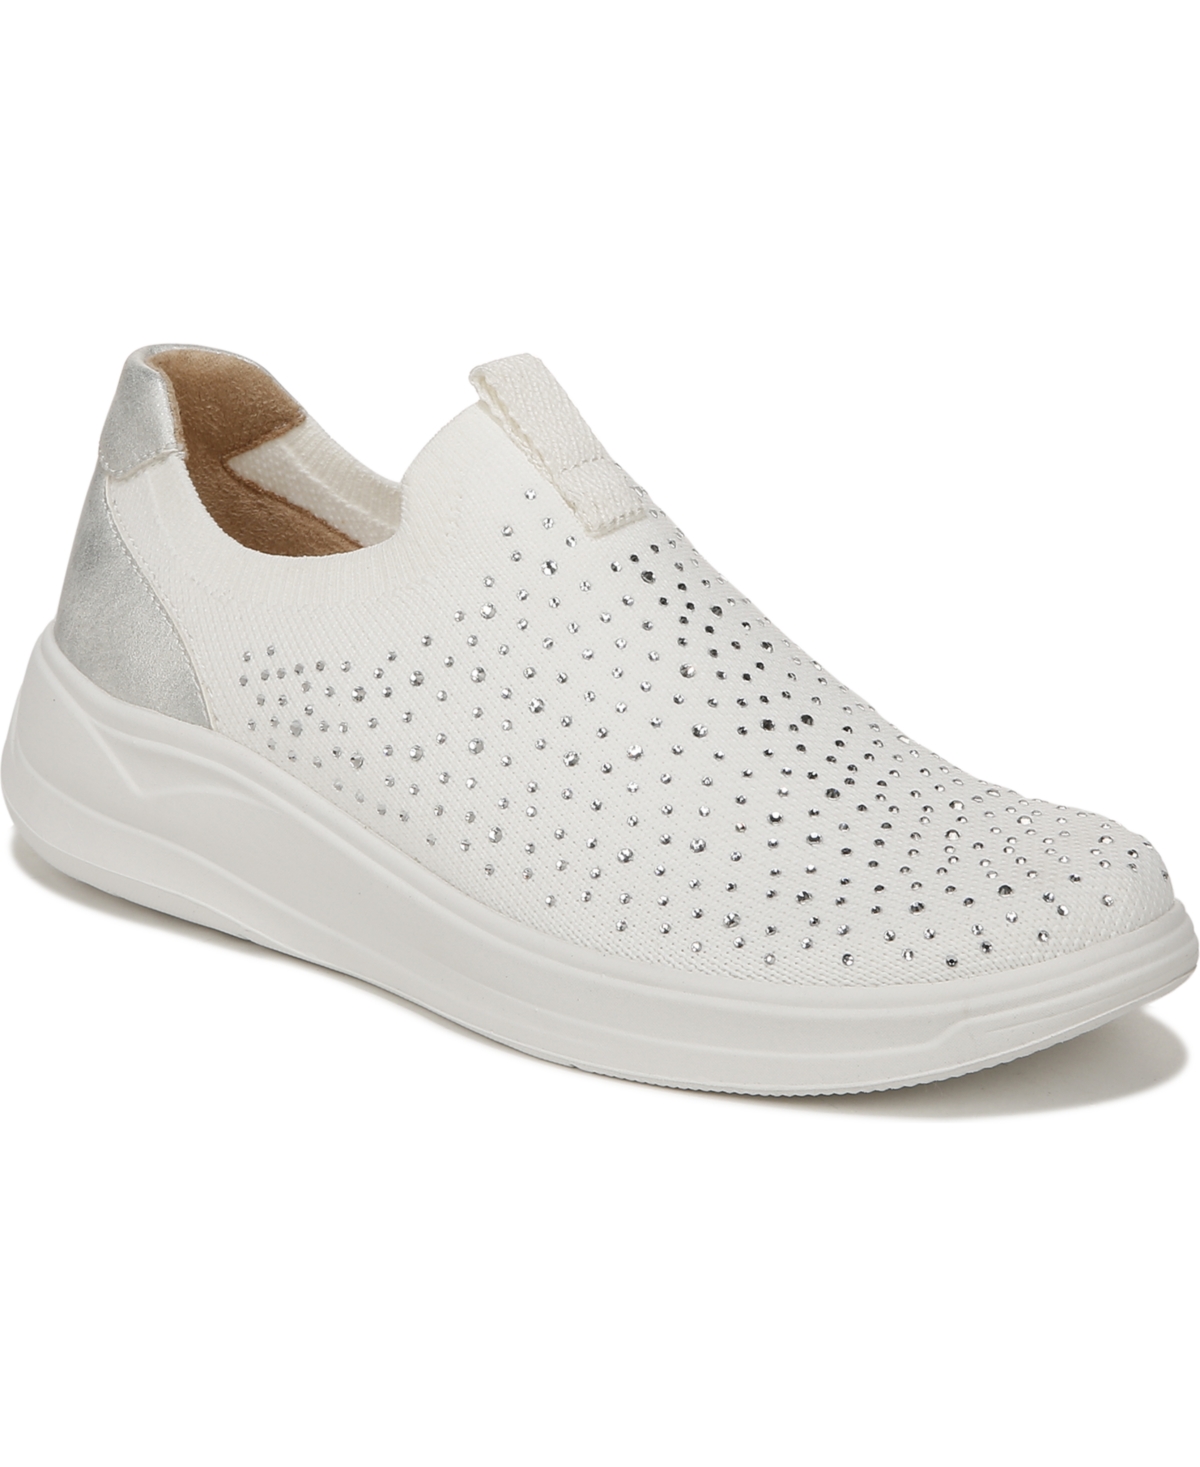 Bzees Twilight Washable Slip-ons In White Knit Fabric